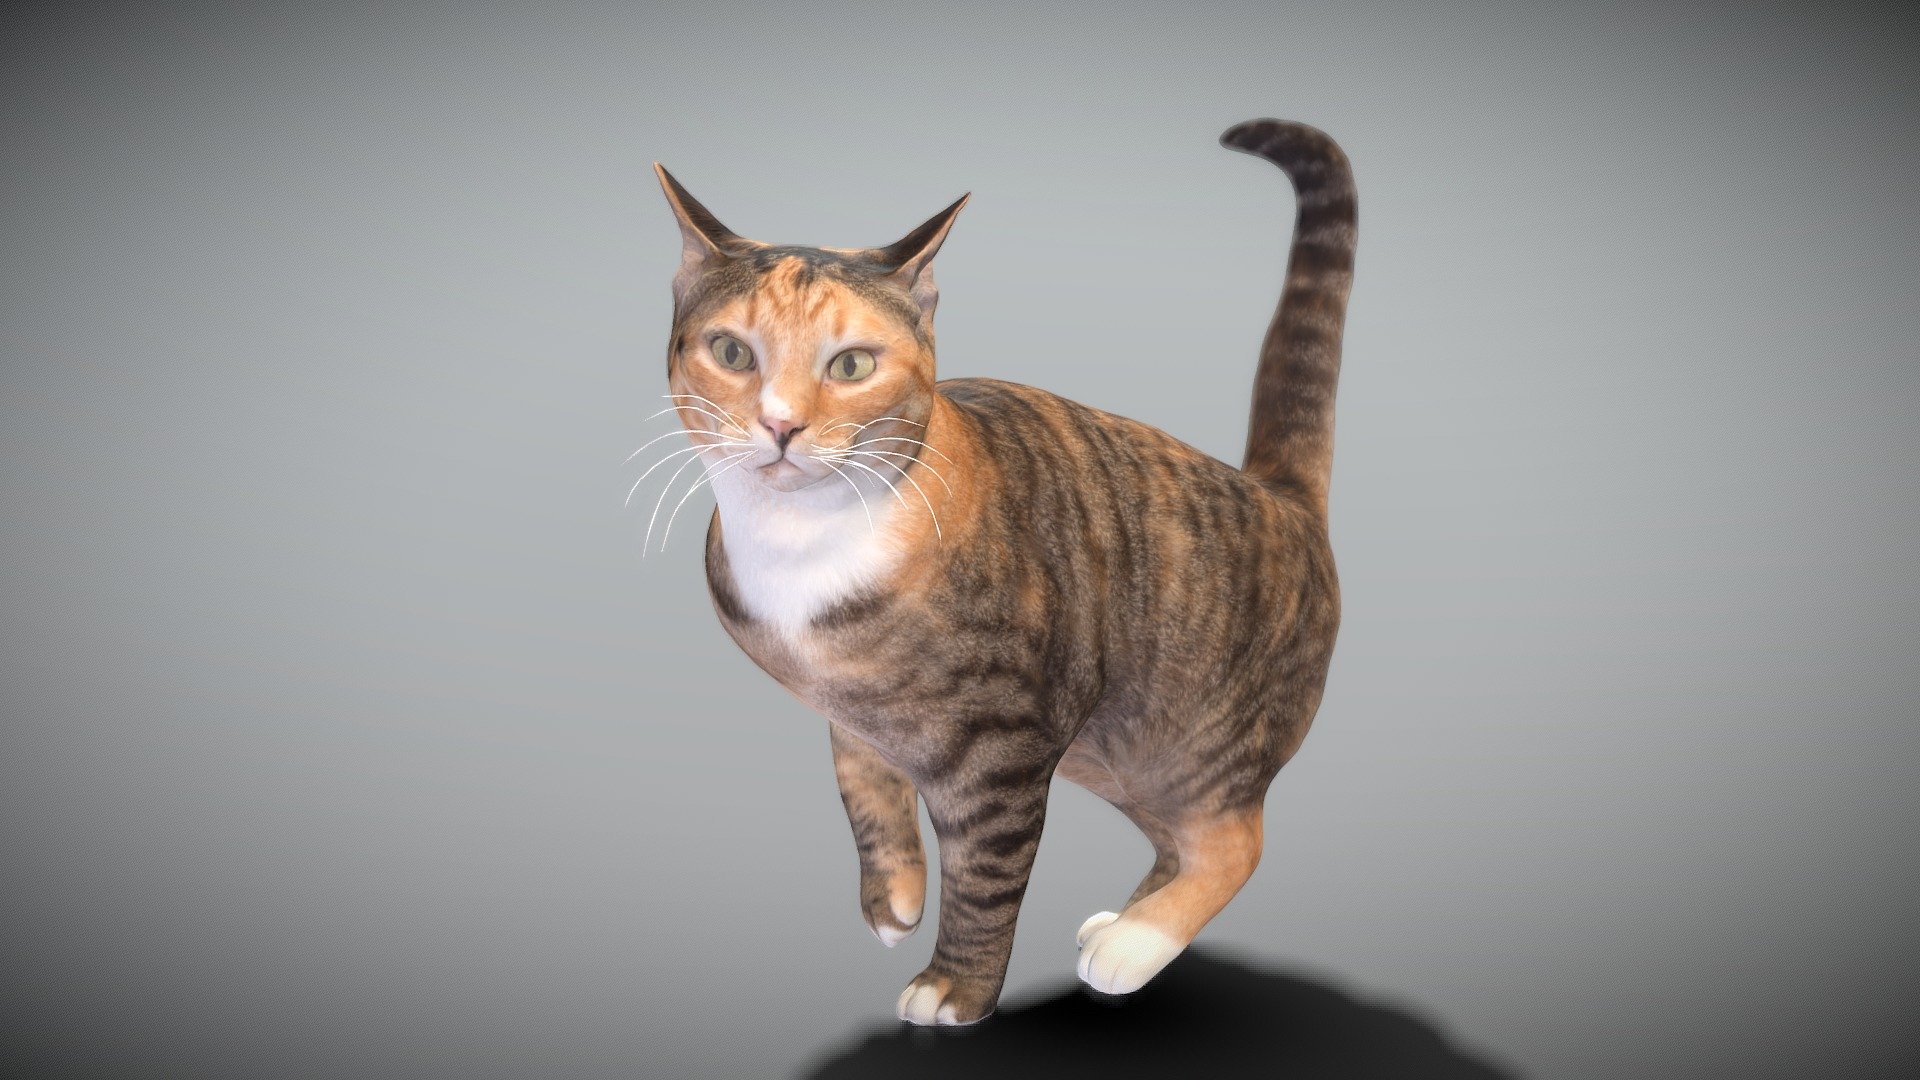 This is a true sized and highly detailed model of a cute charming calico cat. It will add life and coziness to any architectural visualisation of houses, playgrounds, parques, urban landscapes, etc.

The product is ready both for immediate use in architectural visualisations, or further render and detailed sculpting in Zbrush.

Technical specifications:




digital double 3d scan model

150k &amp; 30k triangles | double triangulated

high-poly model (.ztl tool with 4-5 subdivisions) clean and retopologized automatically via ZRemesher

sufficiently clean

PBR textures 8K resolution: Diffuse, Normal, Specular maps

non-overlapping UV map

no extra plugins are required for this model

Download package includes a Cinema 4D project file with Redshift shader, OBJ, FBX, STL files, which are applicable for 3ds Max, Maya, Unreal Engine, Unity, Blender, etc. All the textures you will find in the “Tex” folder, included into the main archive.

3D EVERYTHING

Stand with Ukraine! - Cat 25 - Buy Royalty Free 3D model by deep3dstudio 3d model